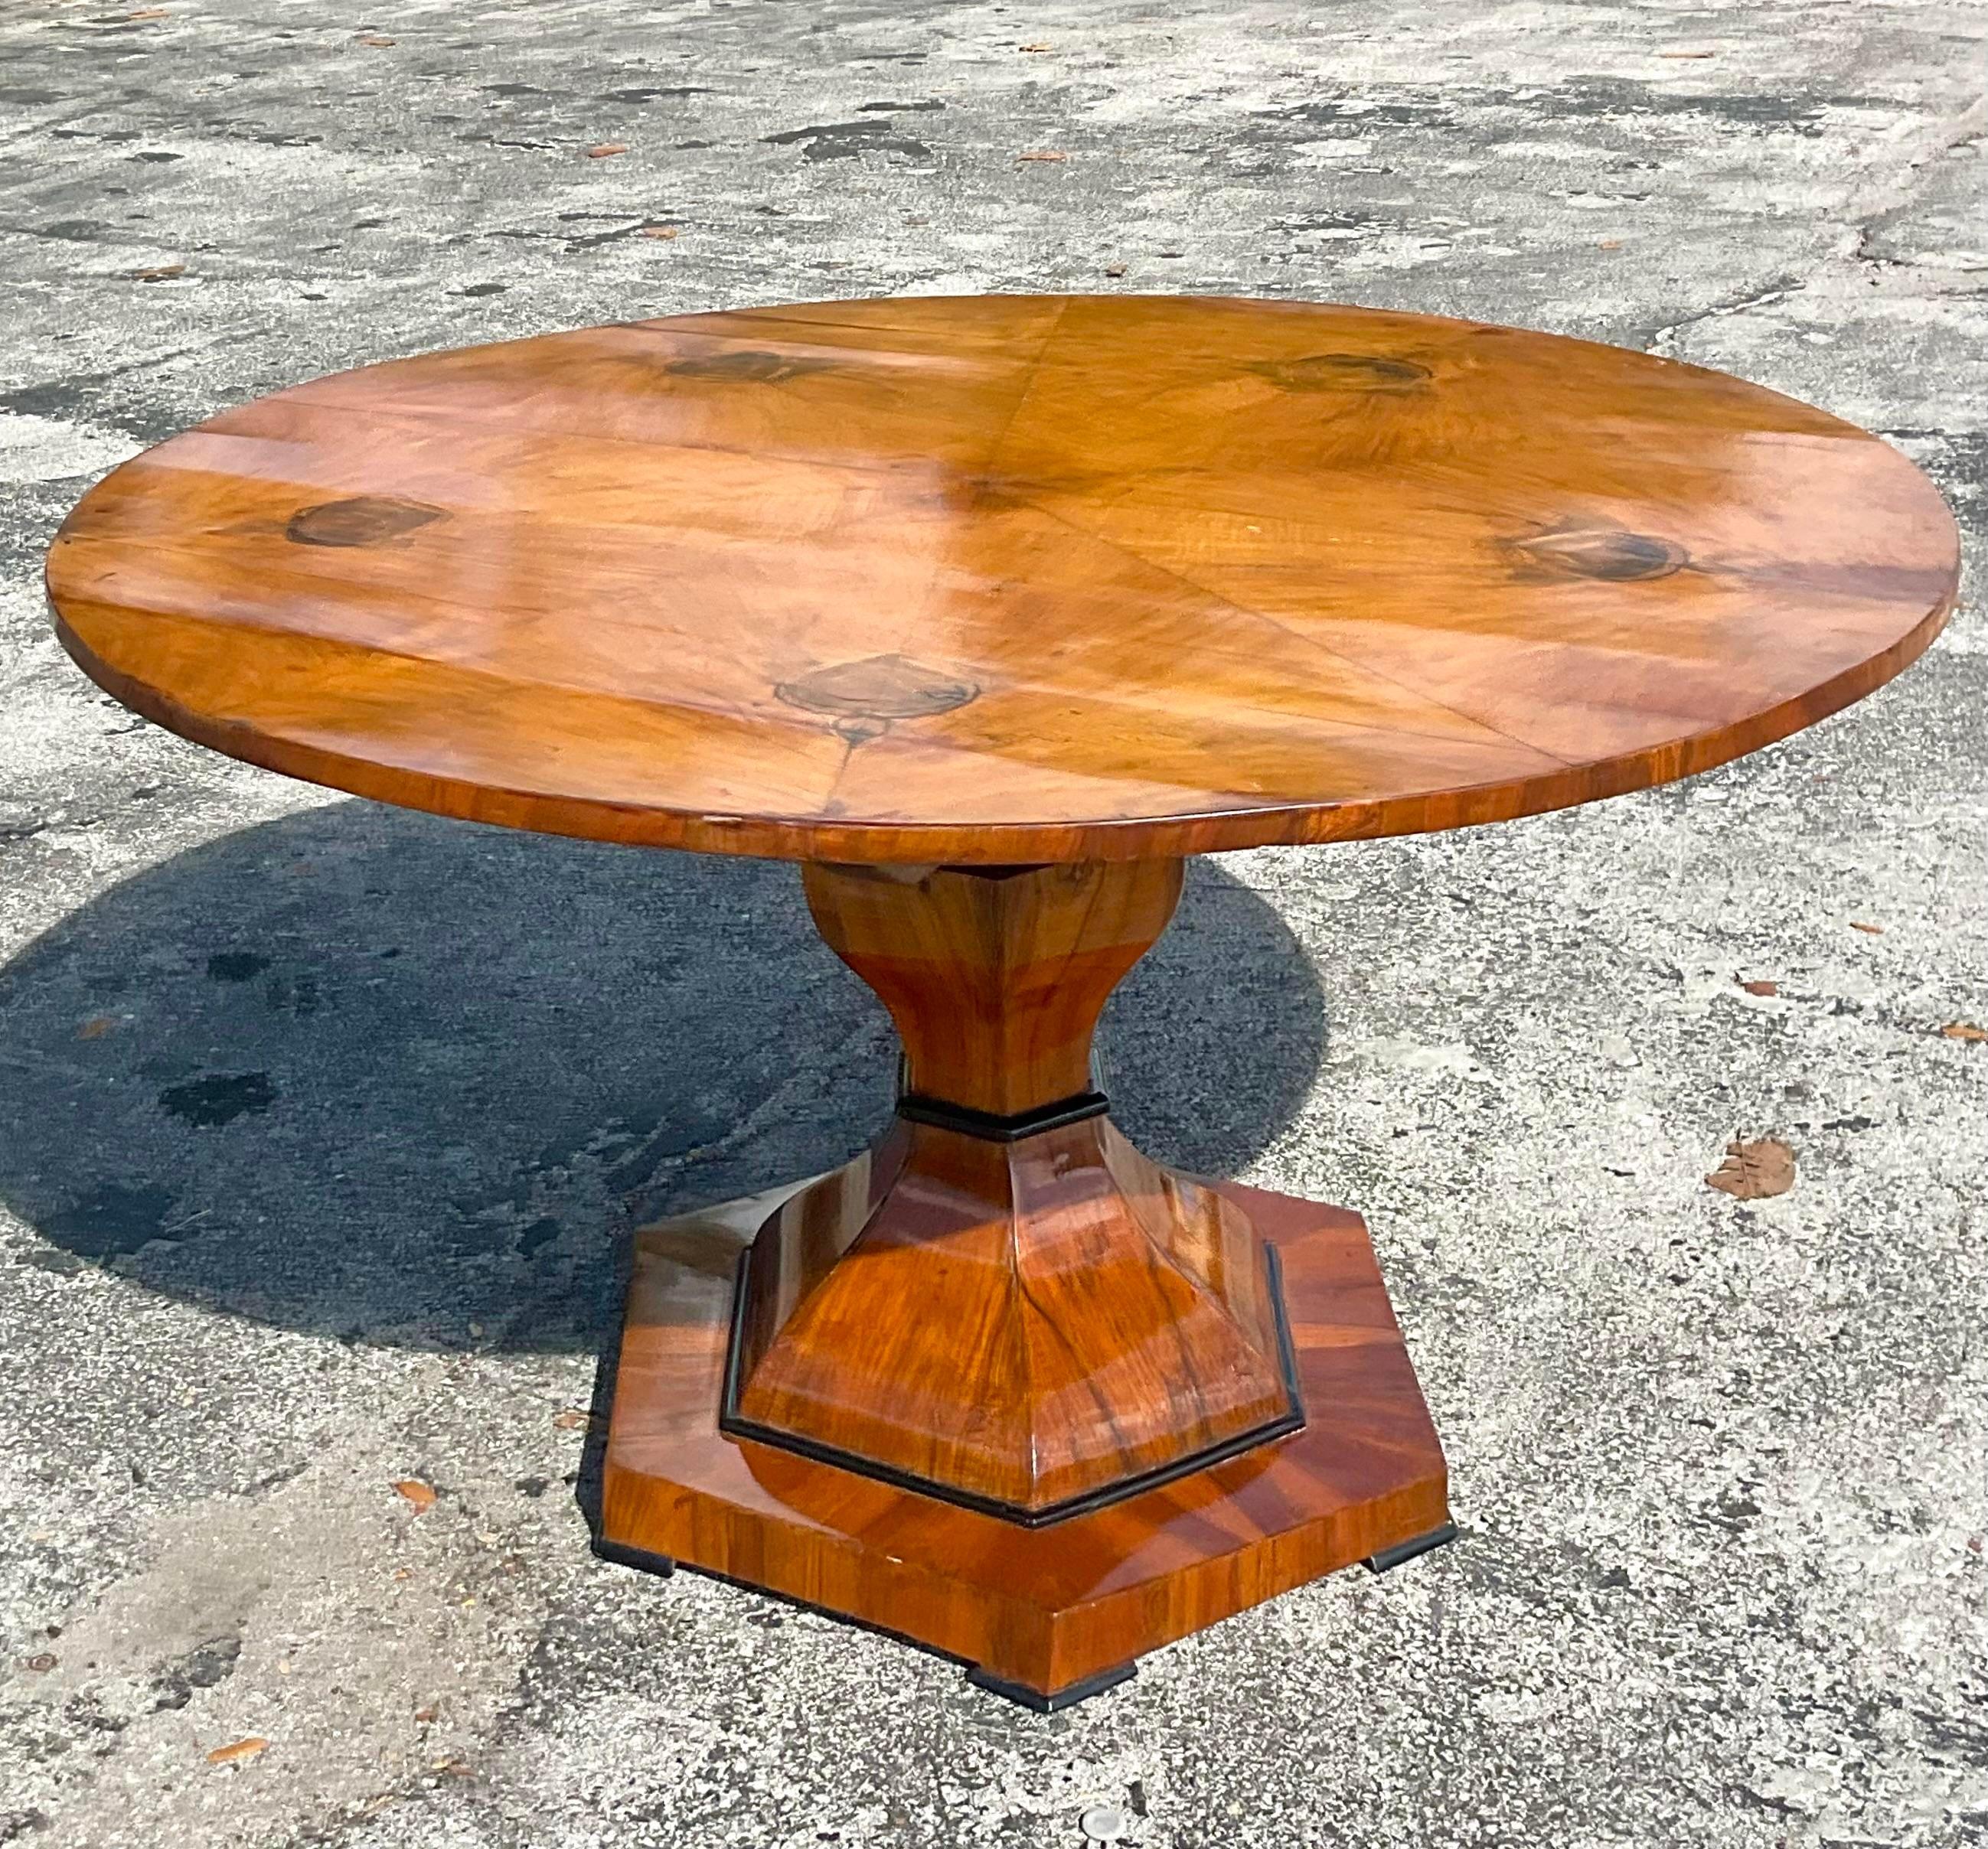 An extraordinary vintage Boho dining table. A stunning Biedermeier table with incredible wood grain detail. Original hardware with tilt top design. Acquired from a Palm Beach estate.